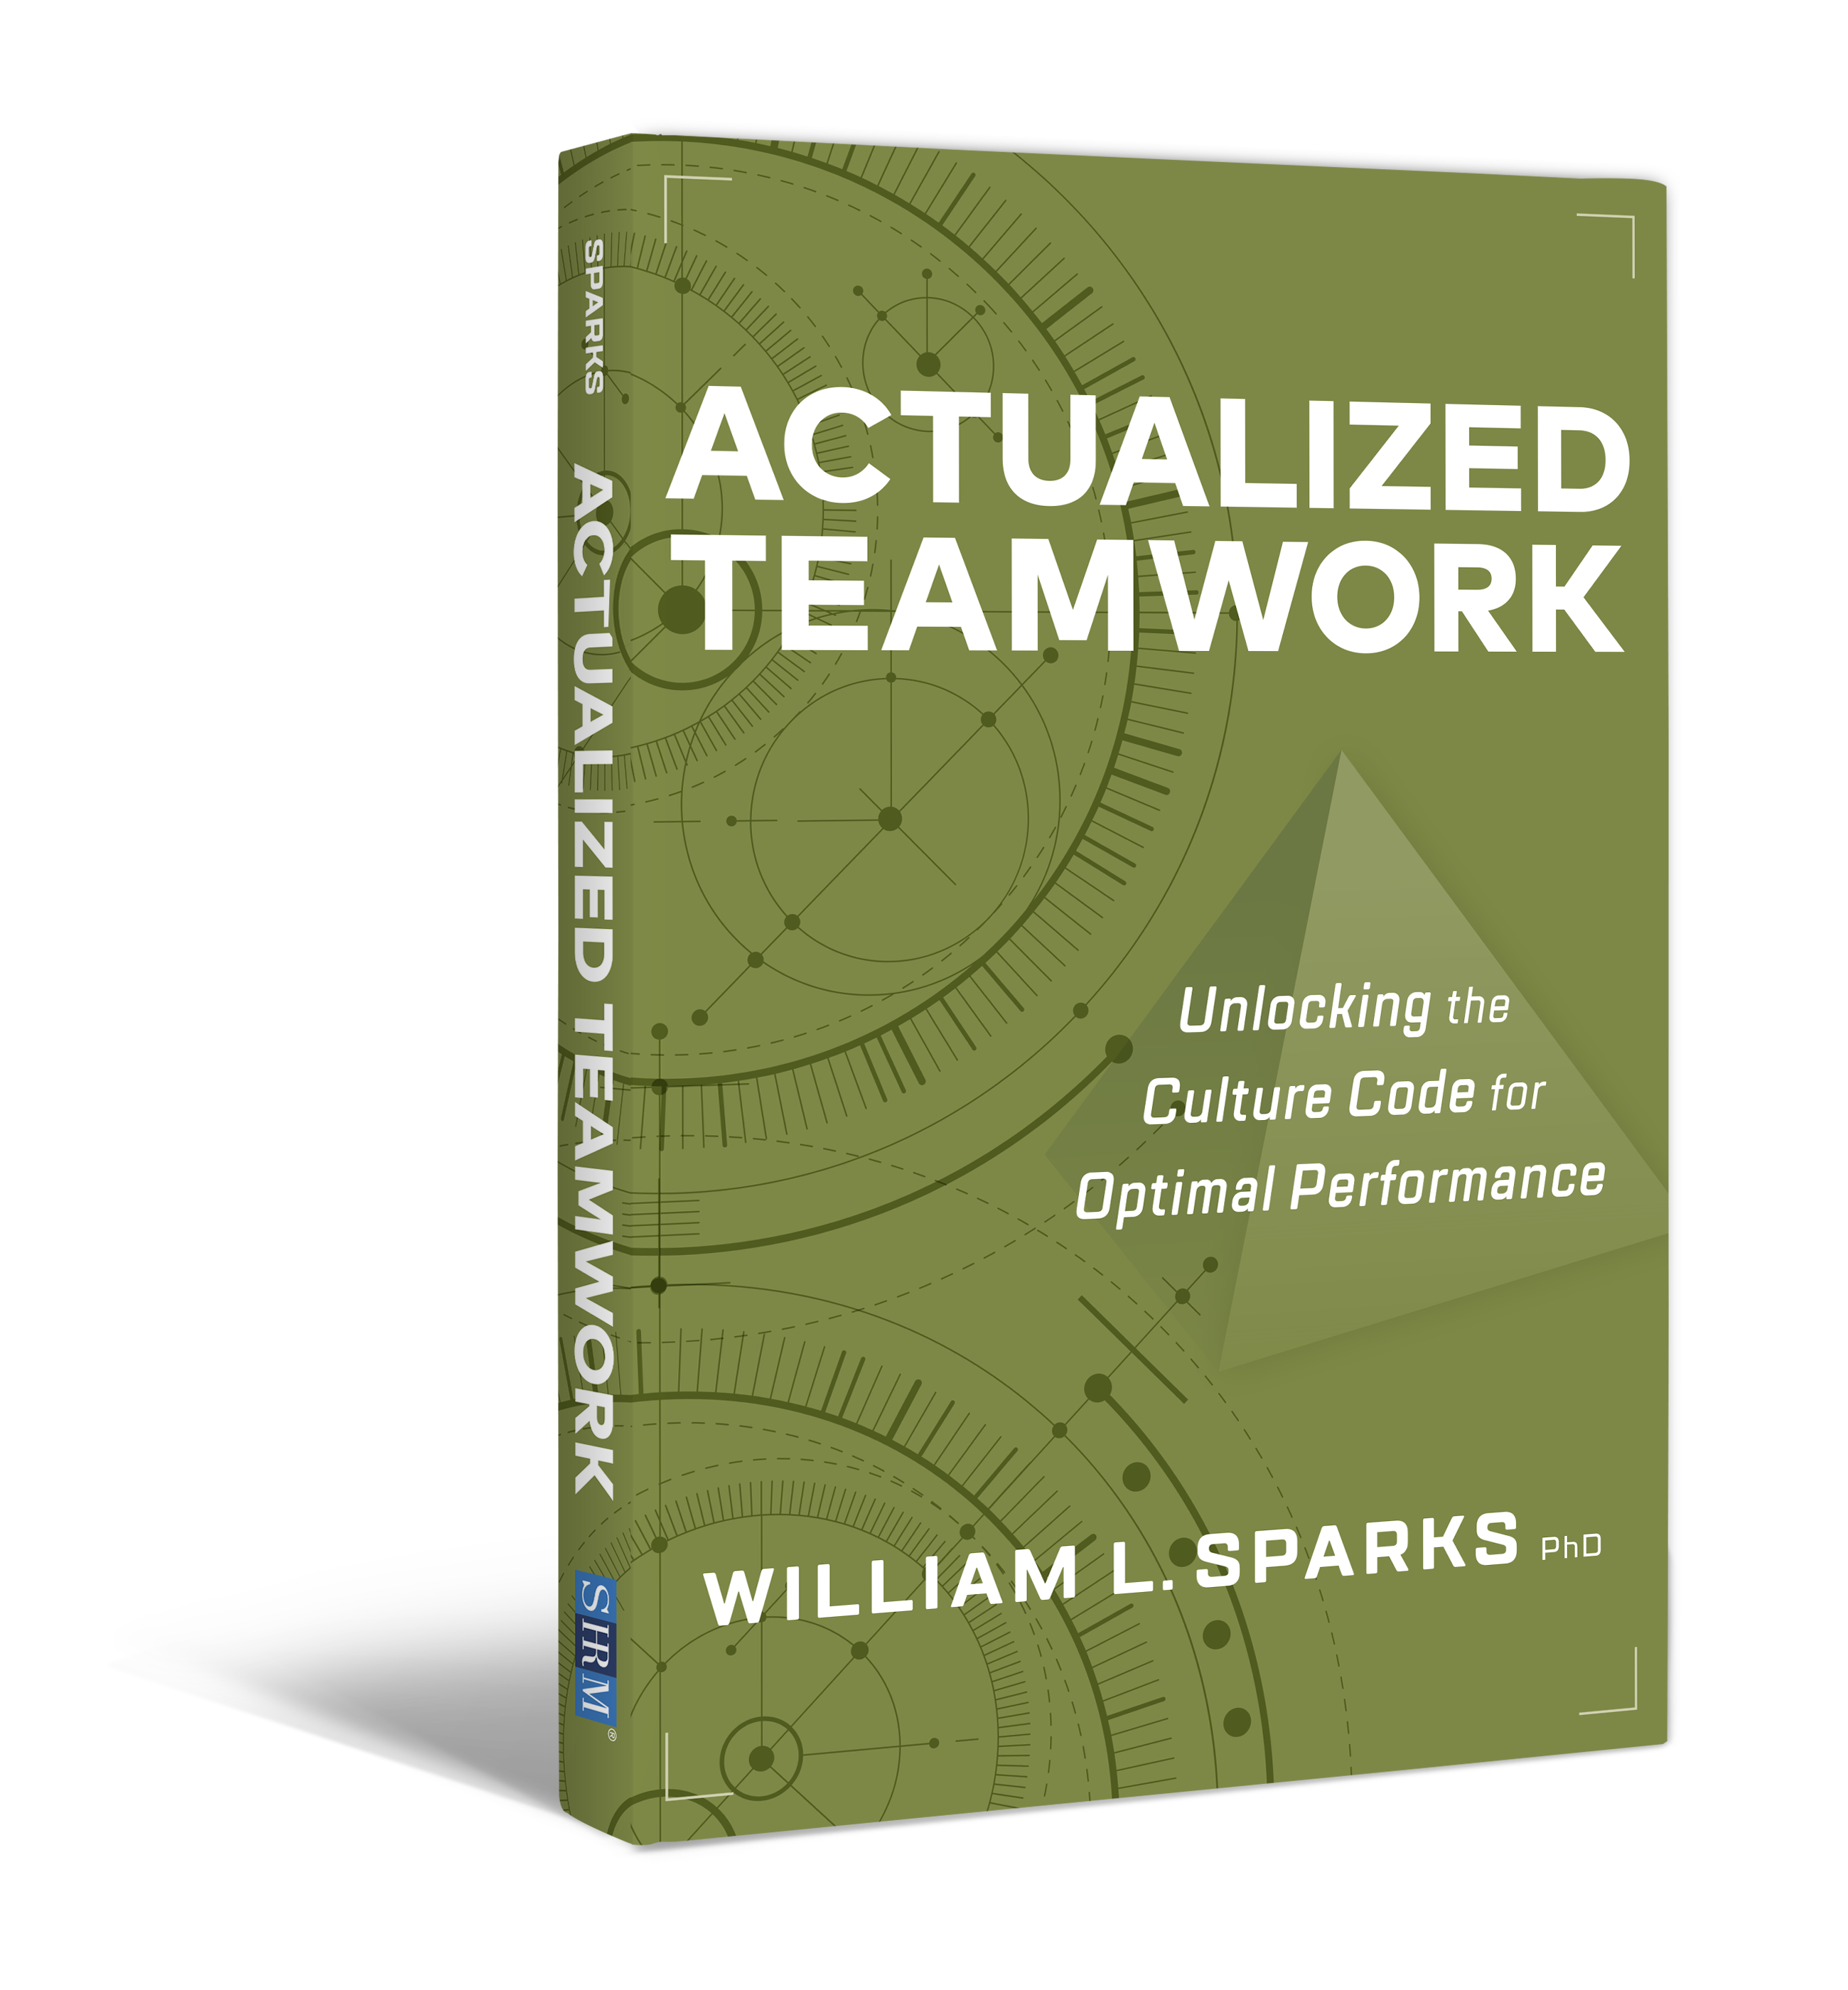 Sparks-Actualized-Teamwork Book Cover